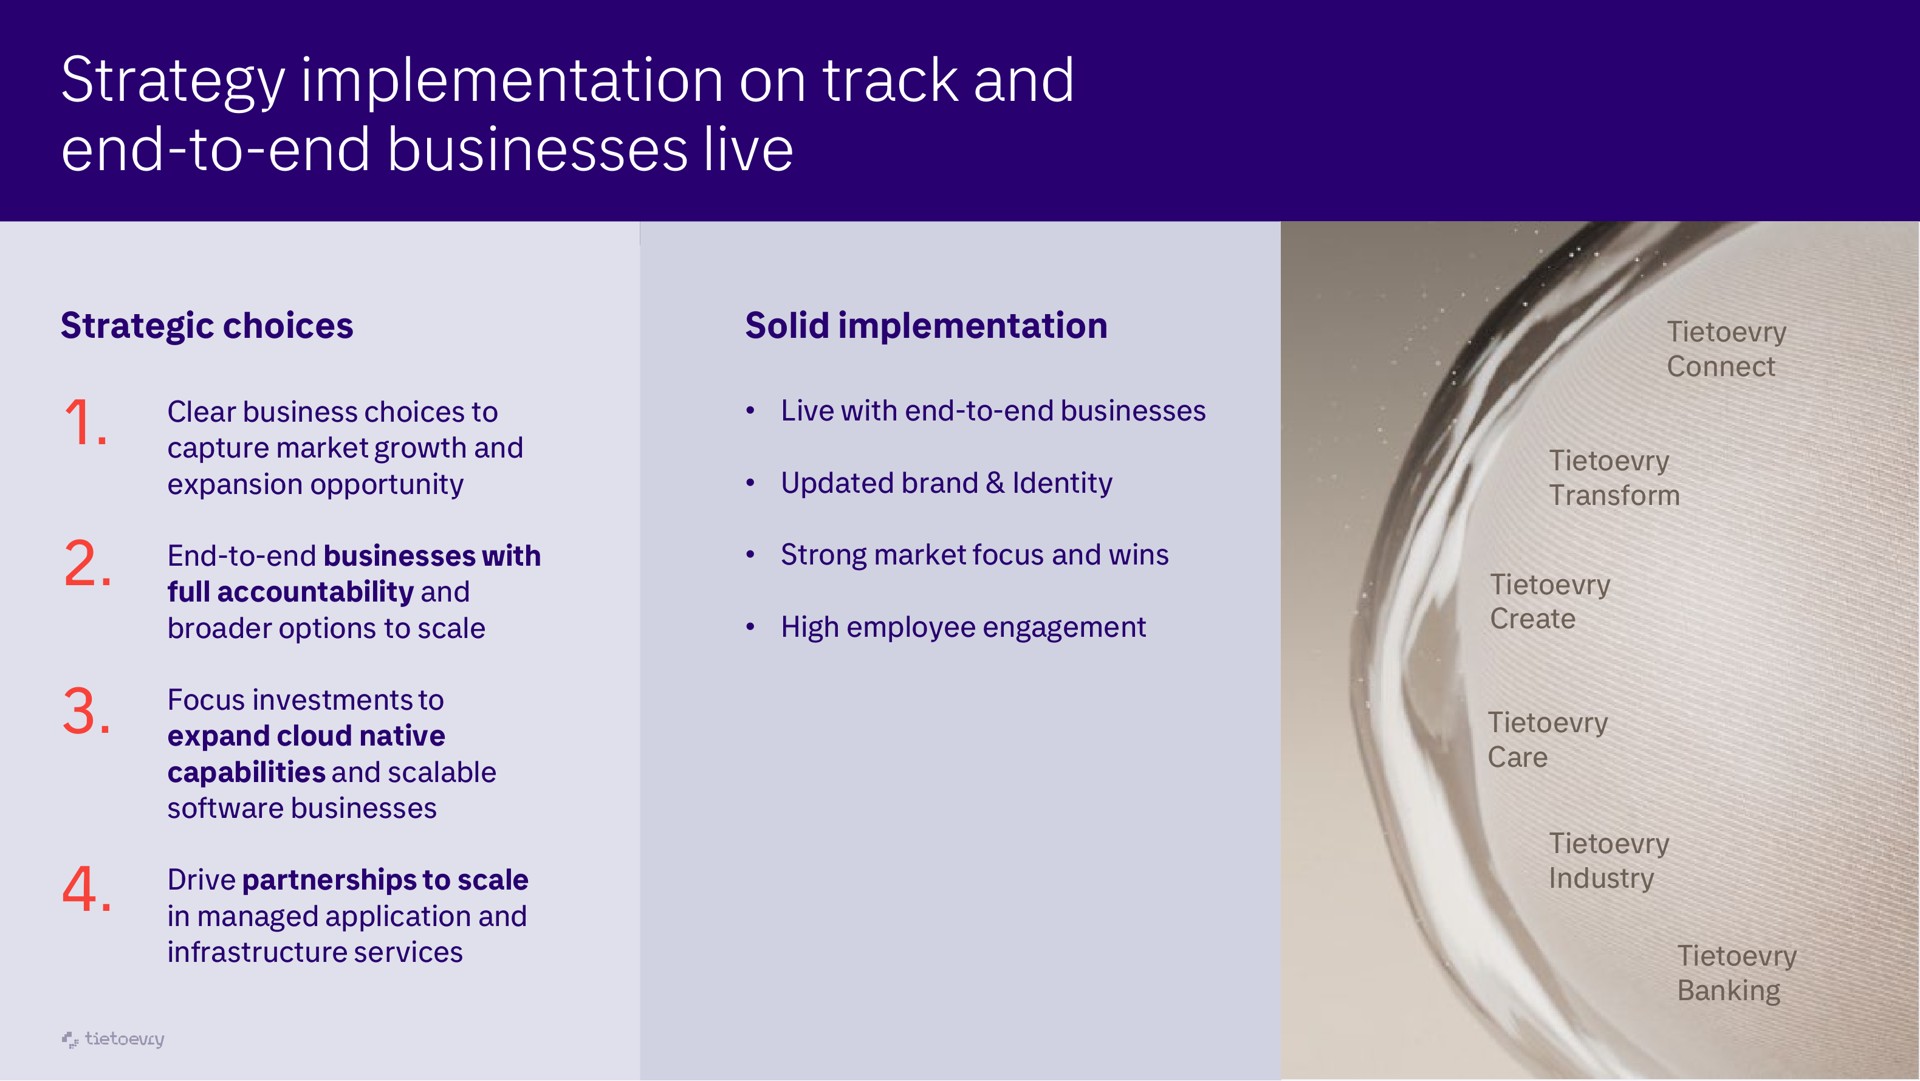 strategy implementation on track and end to end businesses live | Tietoevry